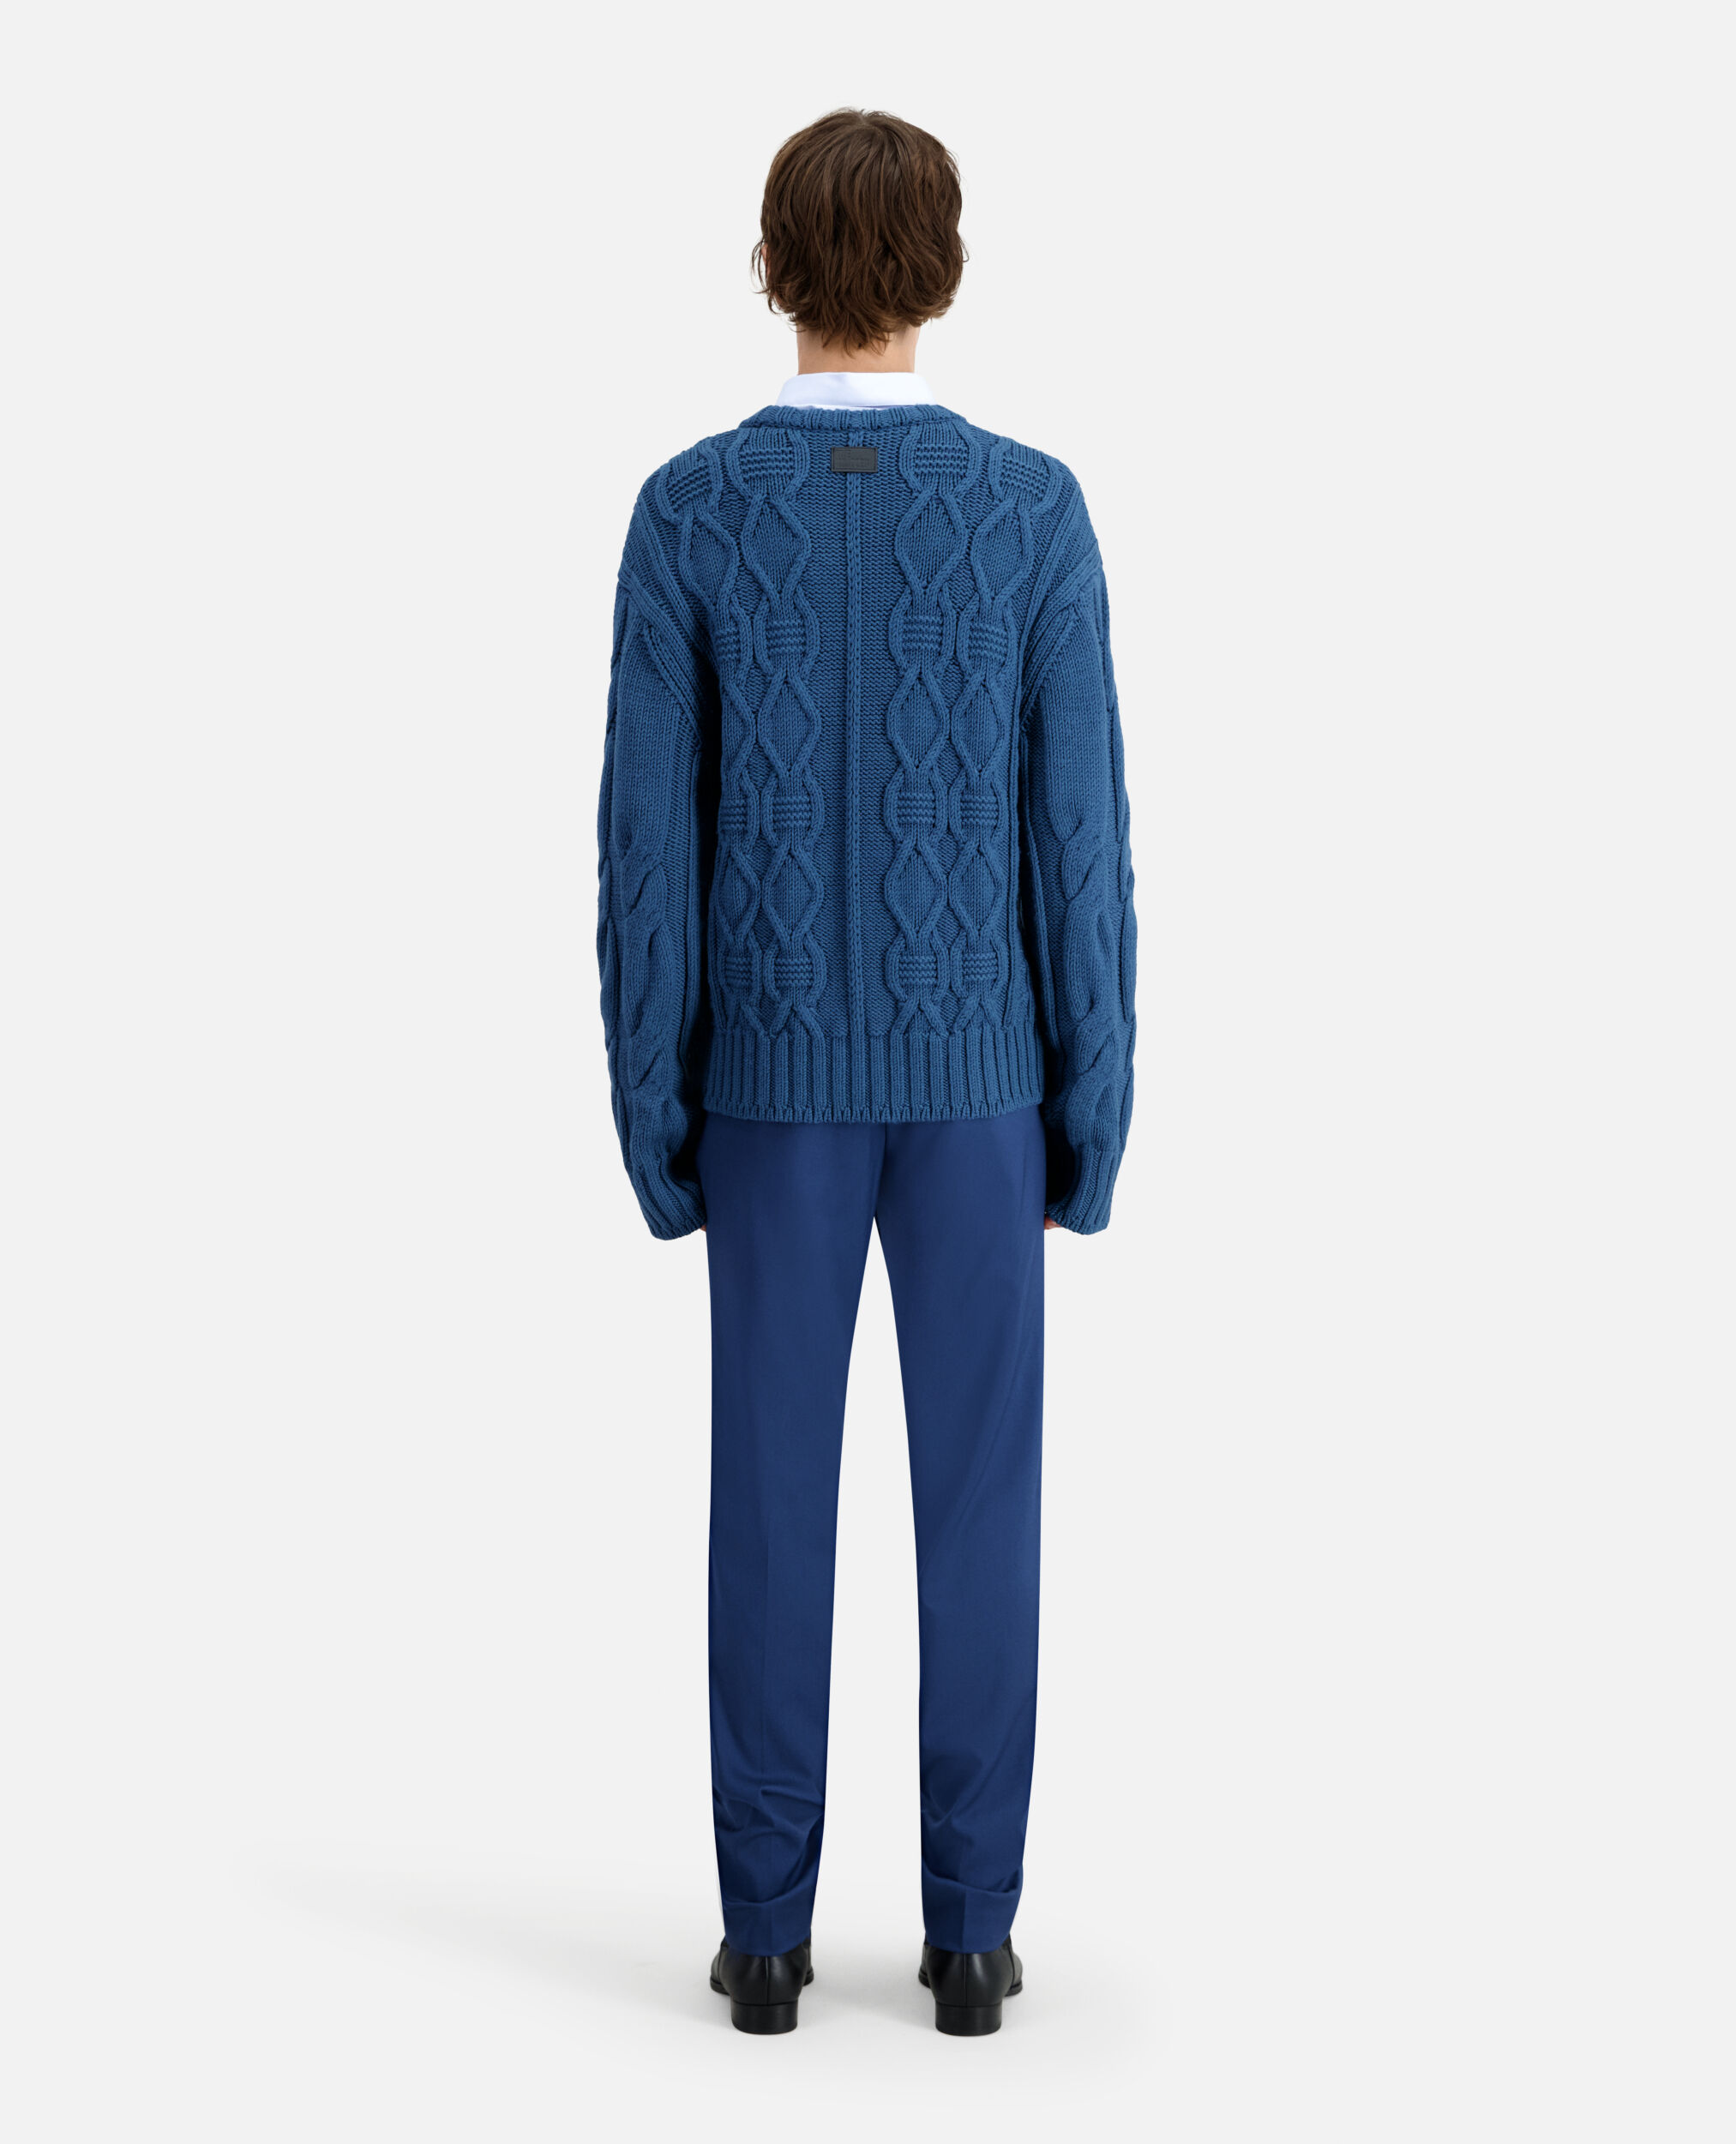 Blauer Pullover aus Wolle mit Zopfmuster, BLUE PETROL, hi-res image number null